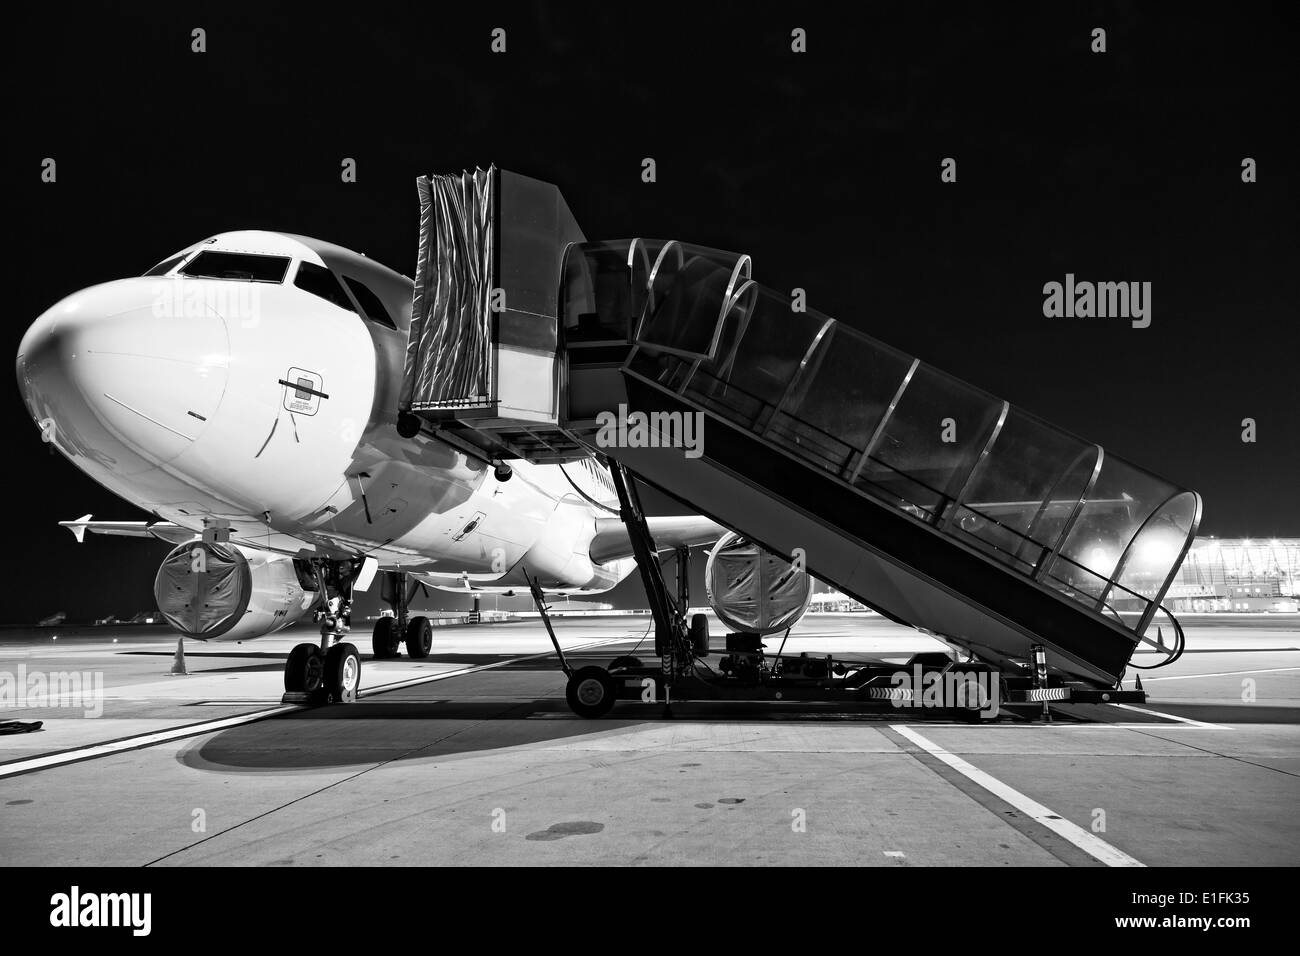 Airplane boarding close up Stock Photo